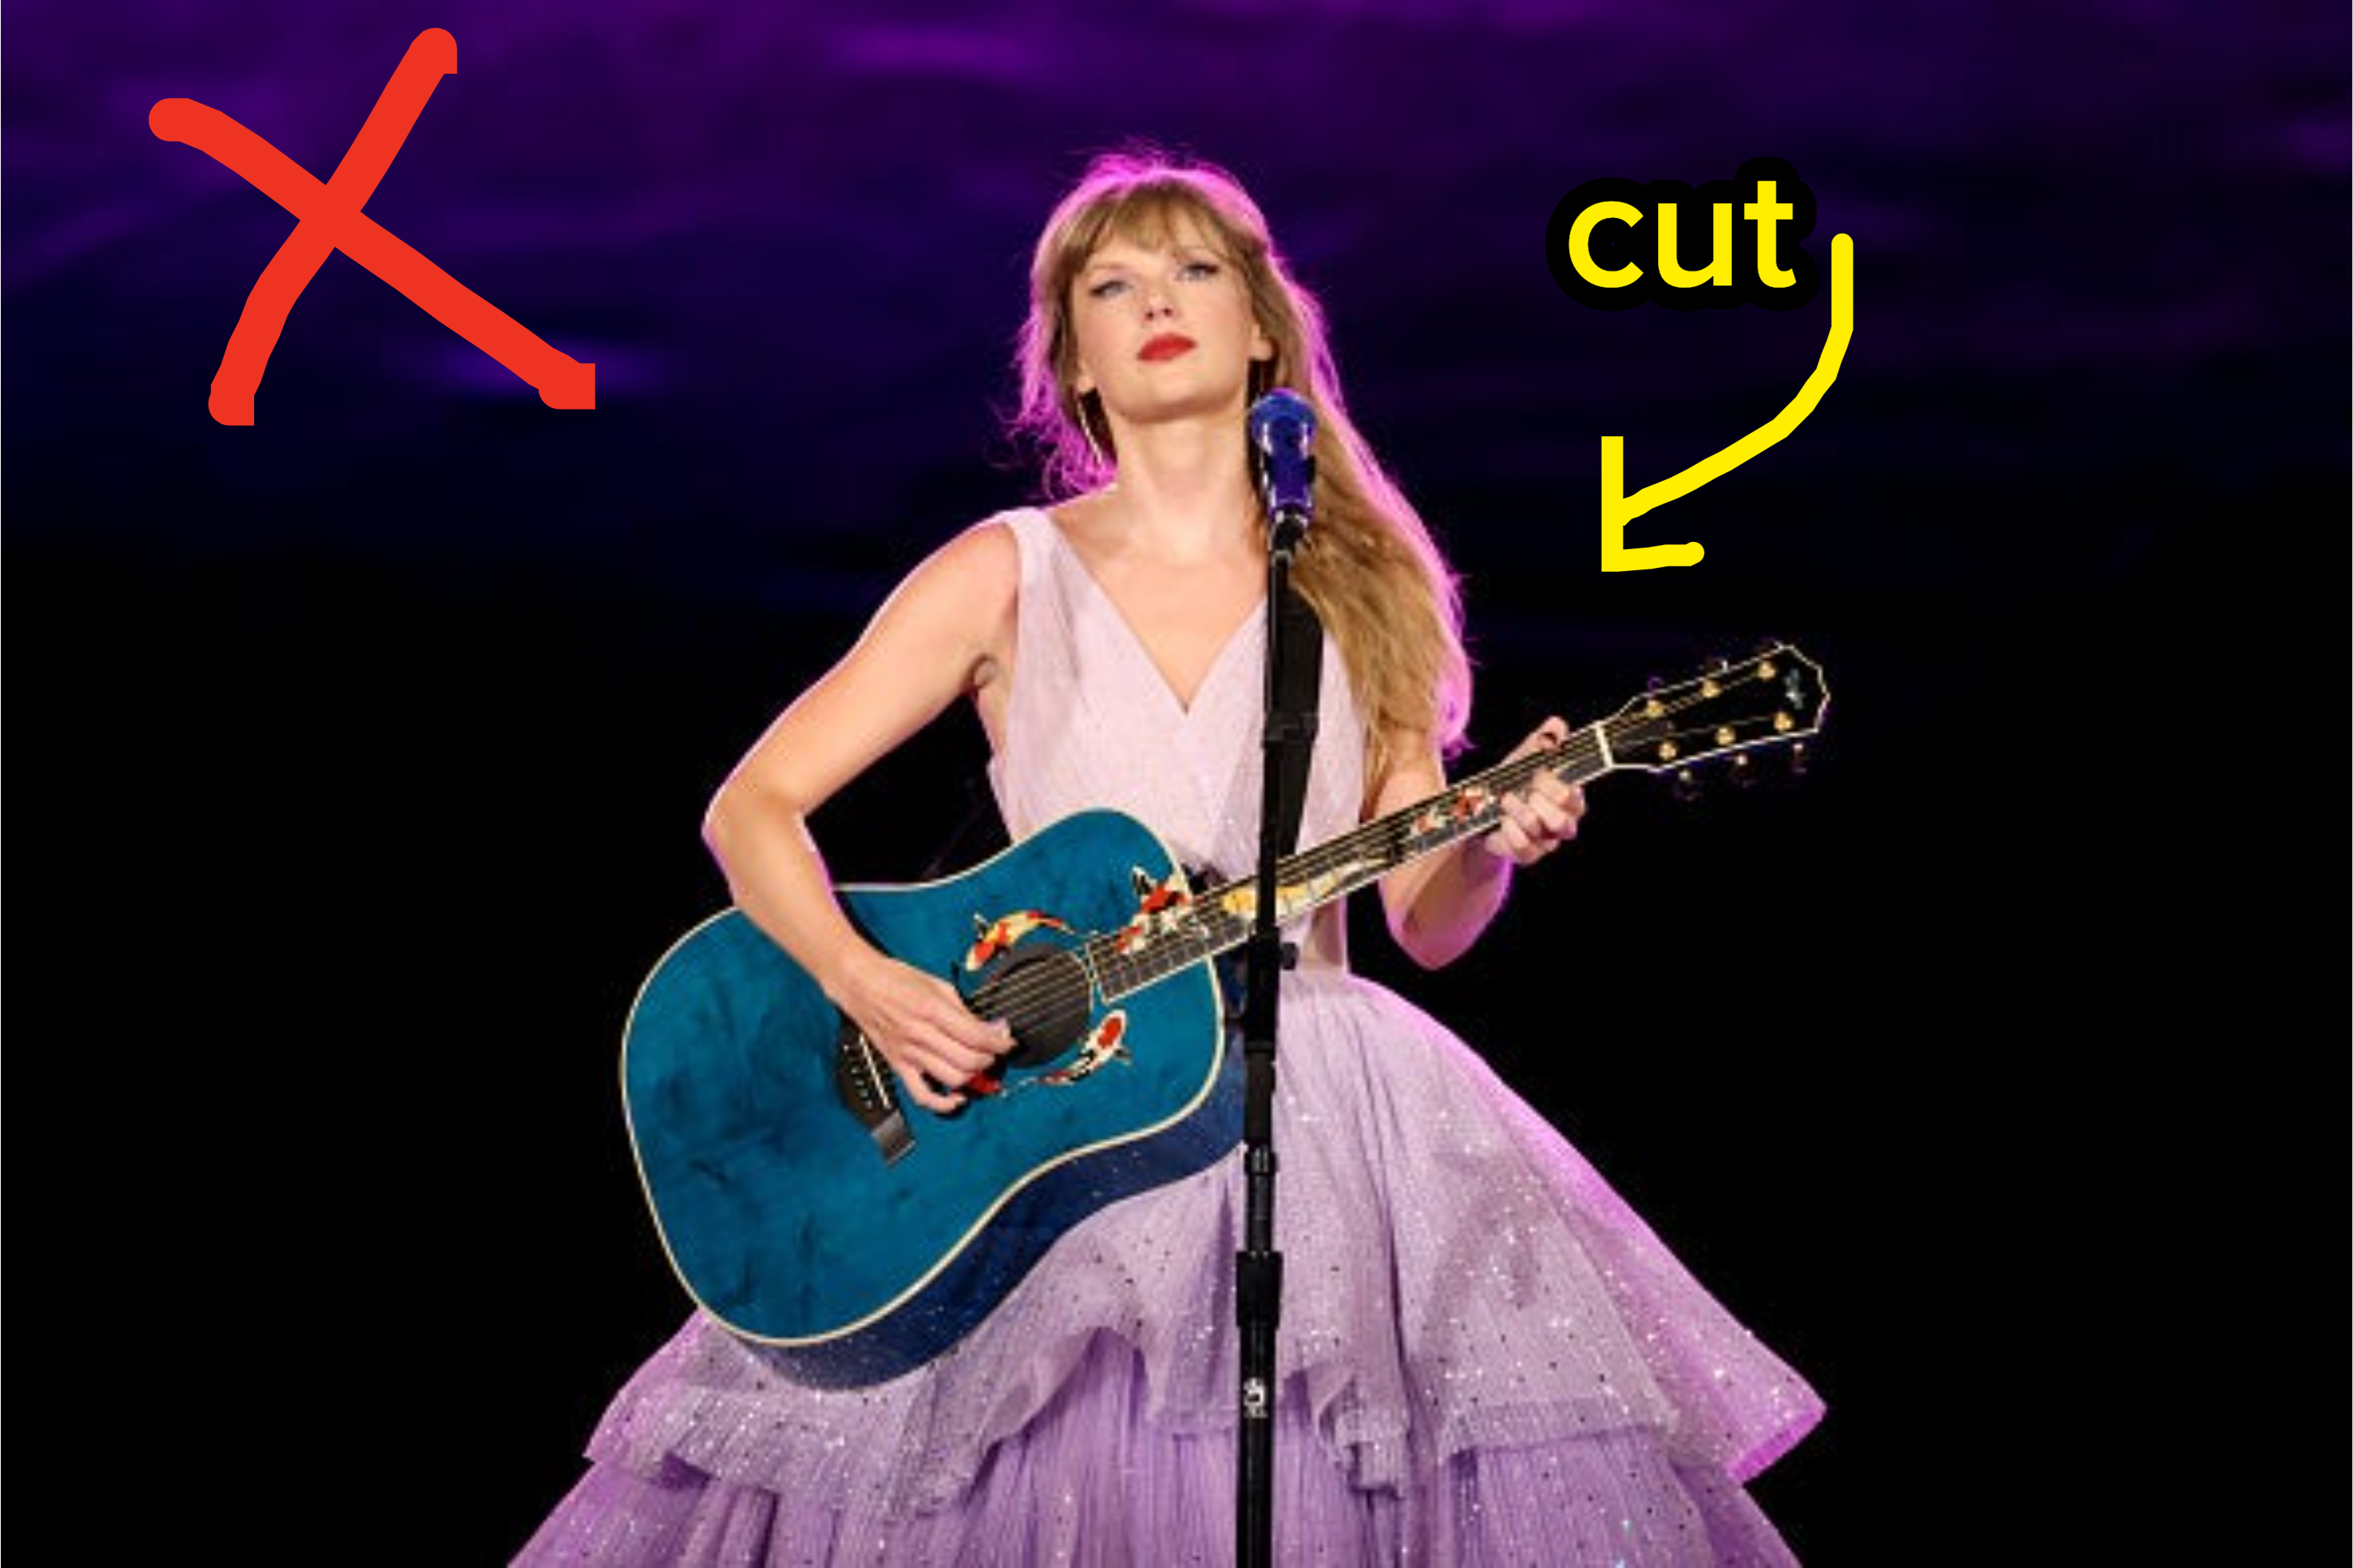 Taylor Swift performs onstage with a guitar, wearing a sparkling fringe dress